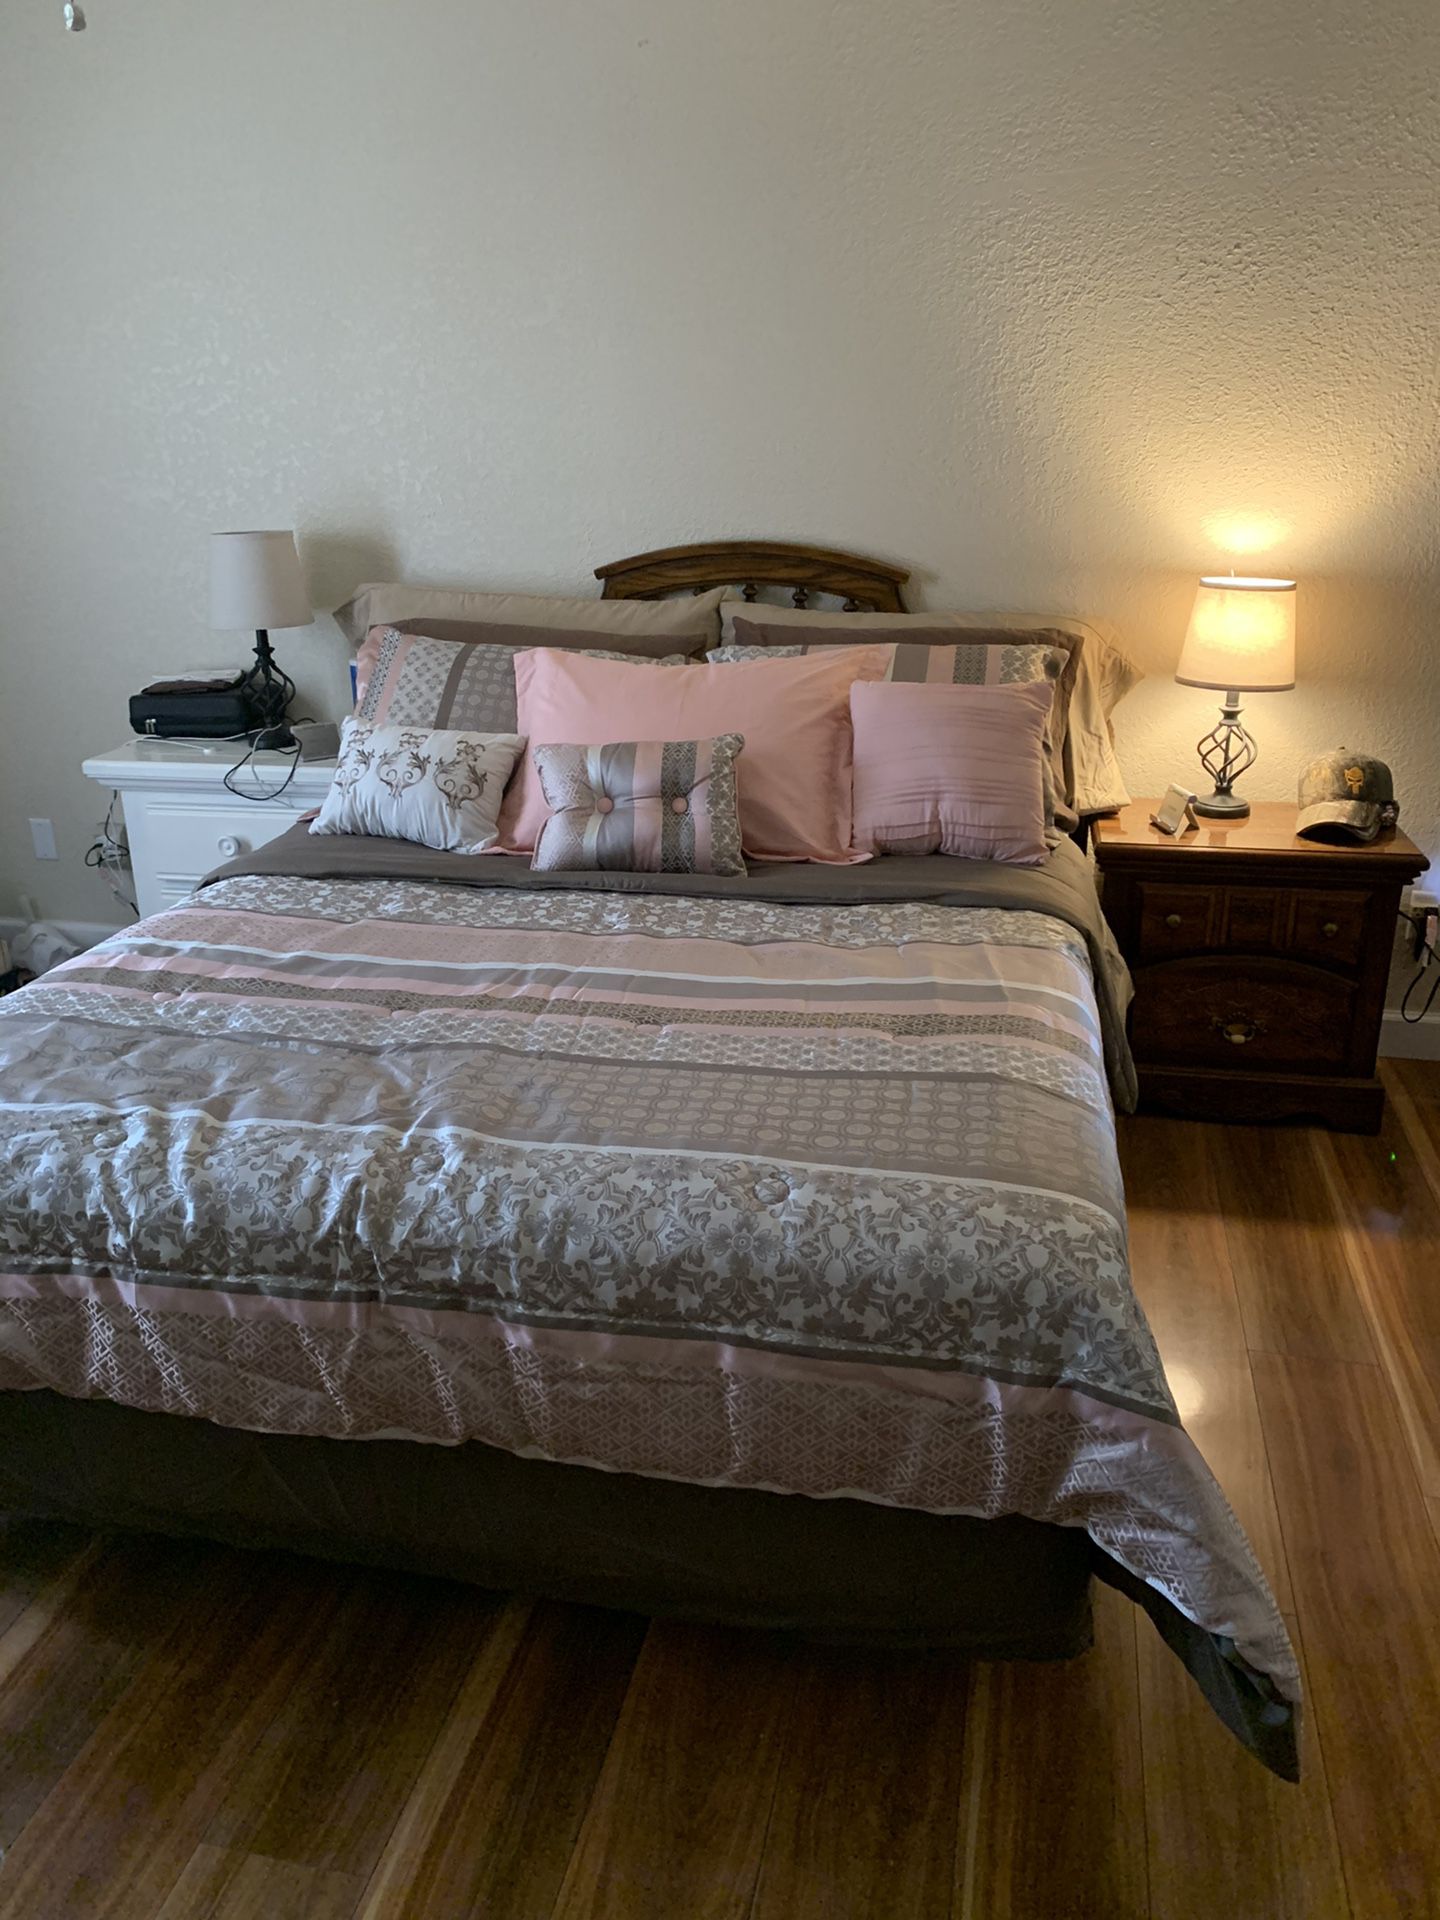 Bed set queen size, one nightstand dresser and Mirror. Matress not included